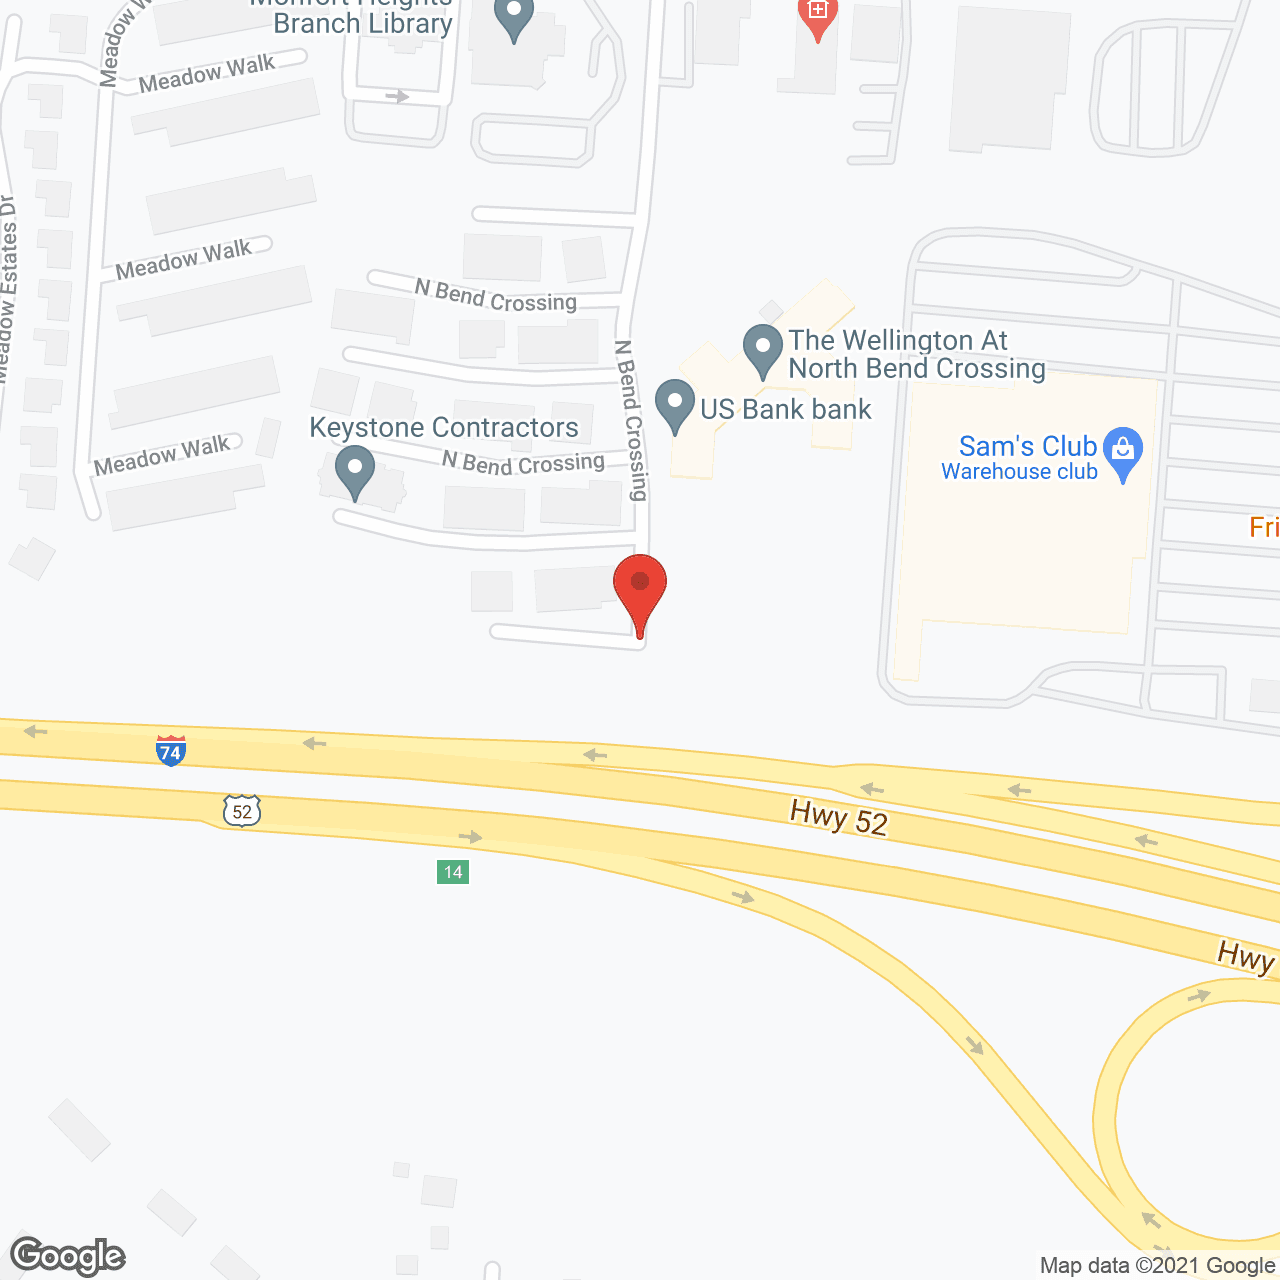 The Wellington at North Bend Crossing in google map